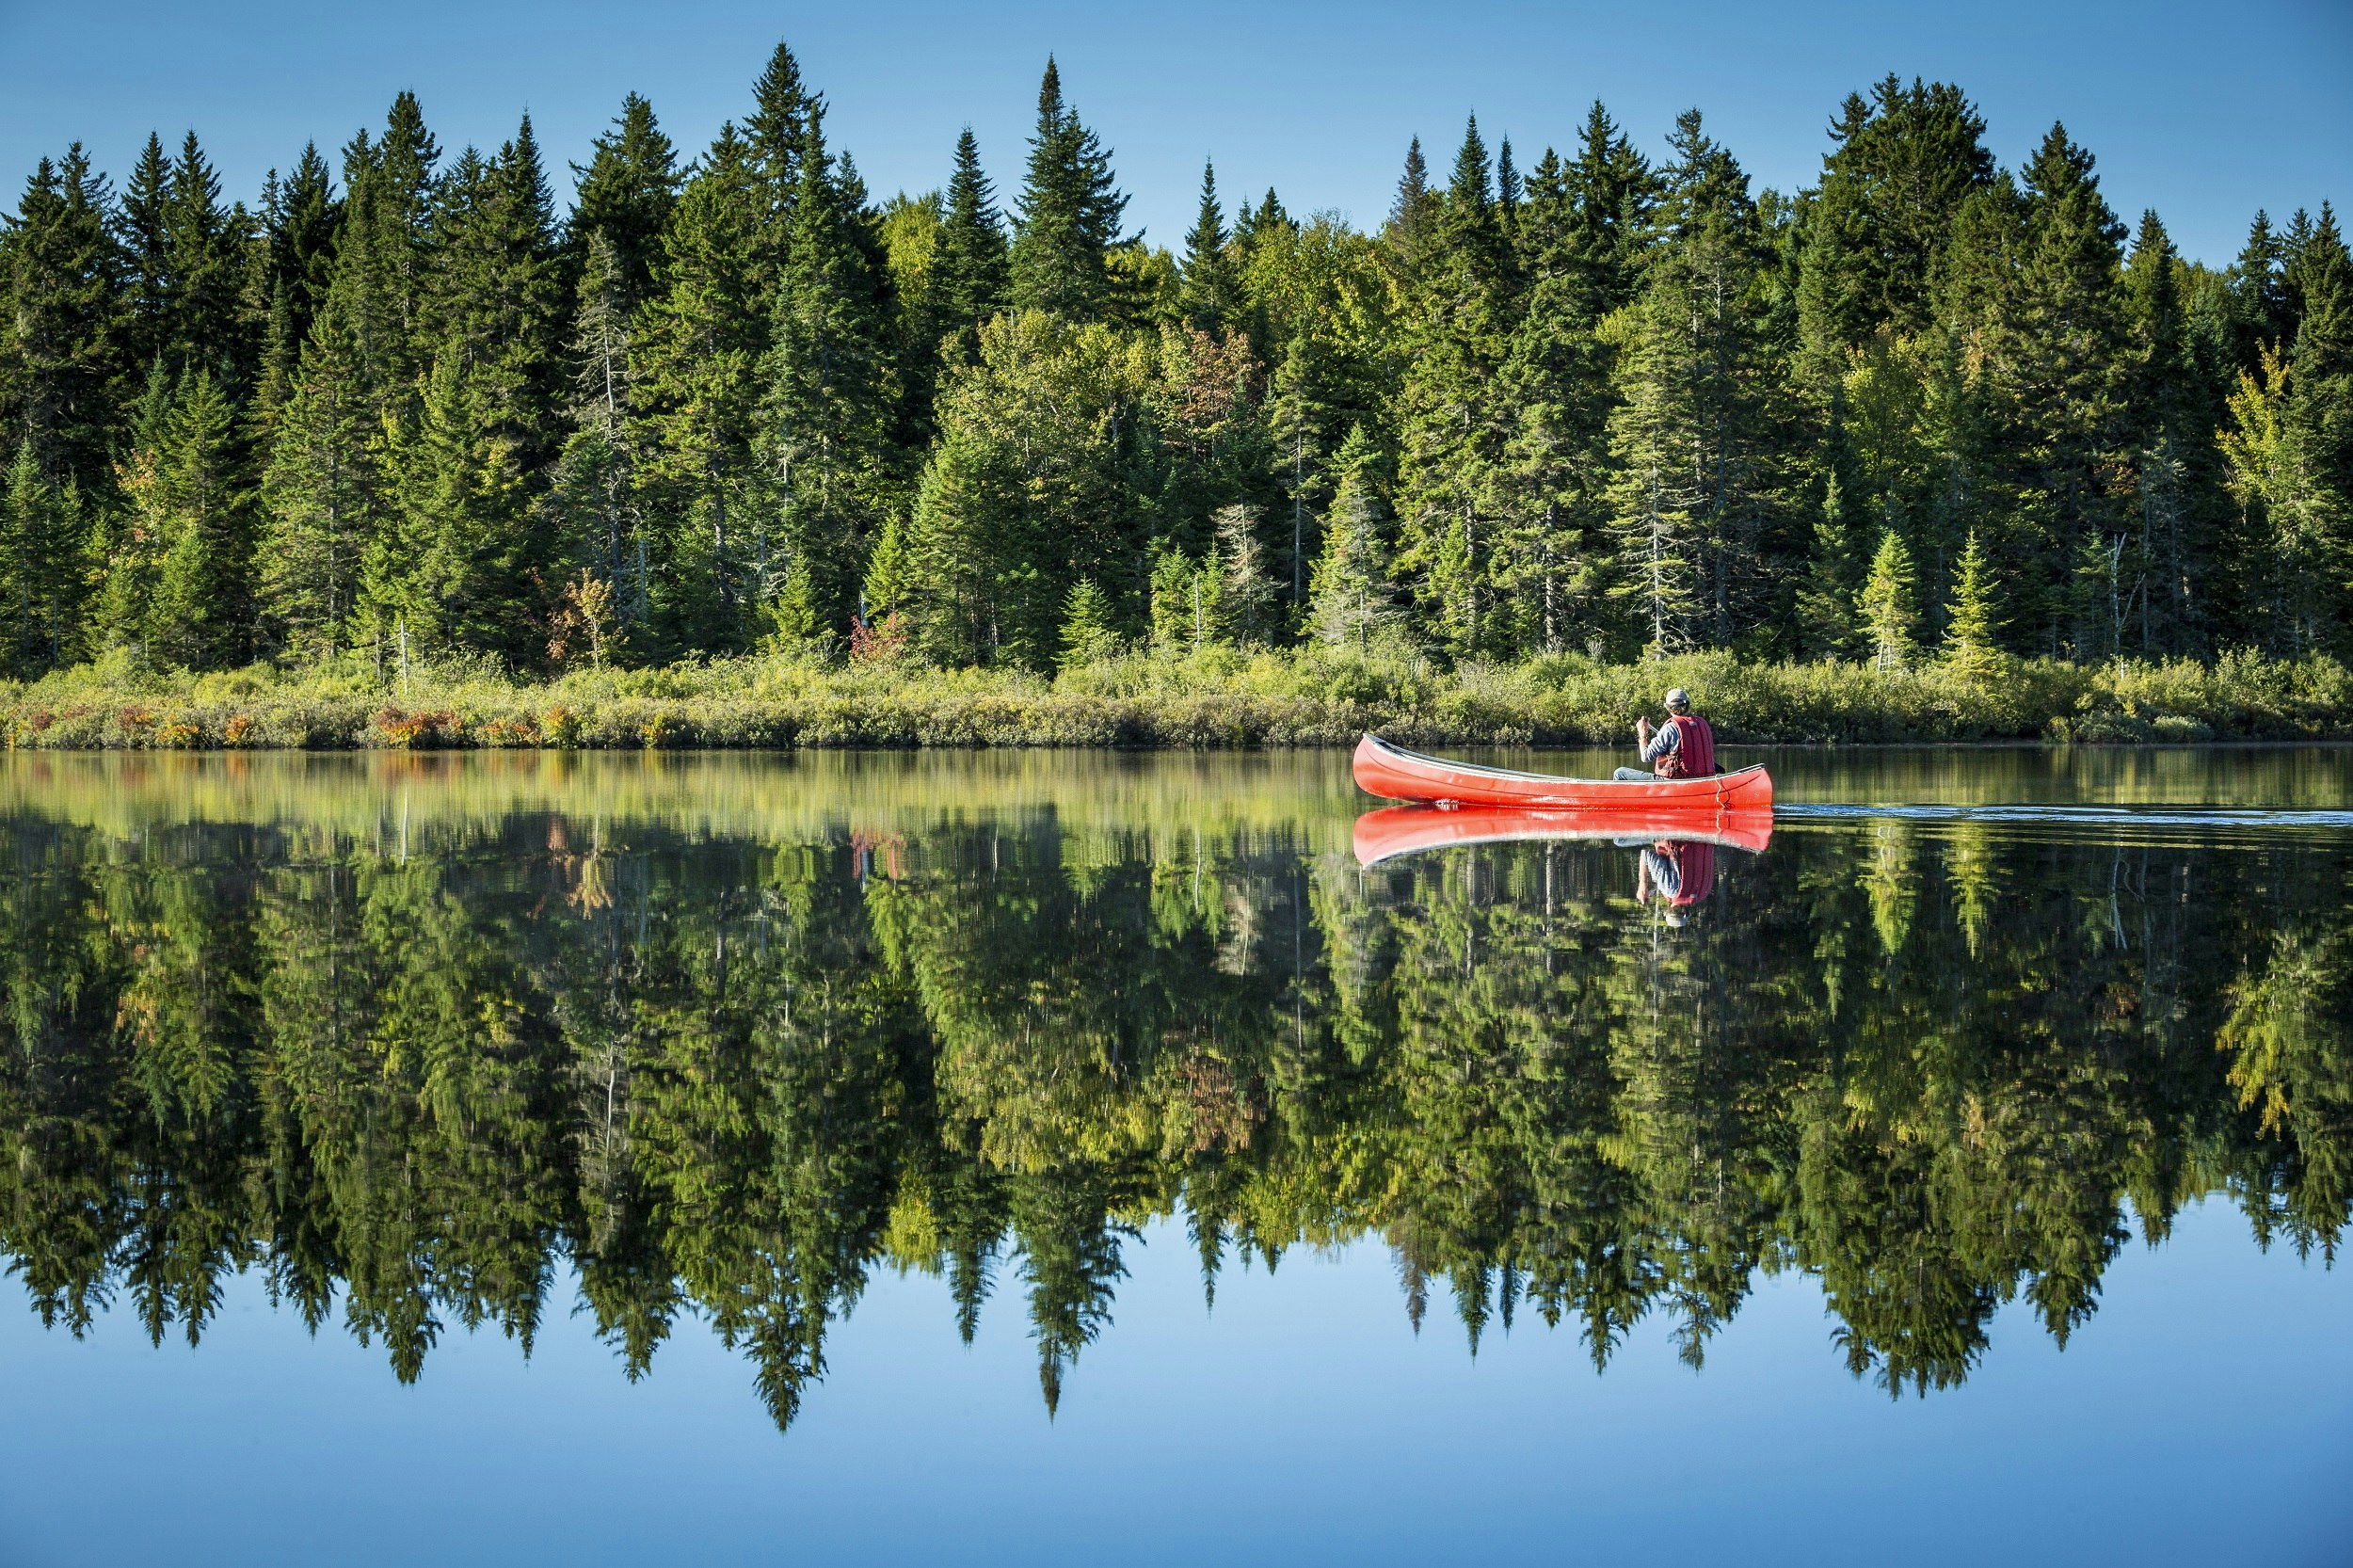 A red canoe paddles down mirror-like waters that are perfectly reflecting the backdrop of forested shore and blue sky.